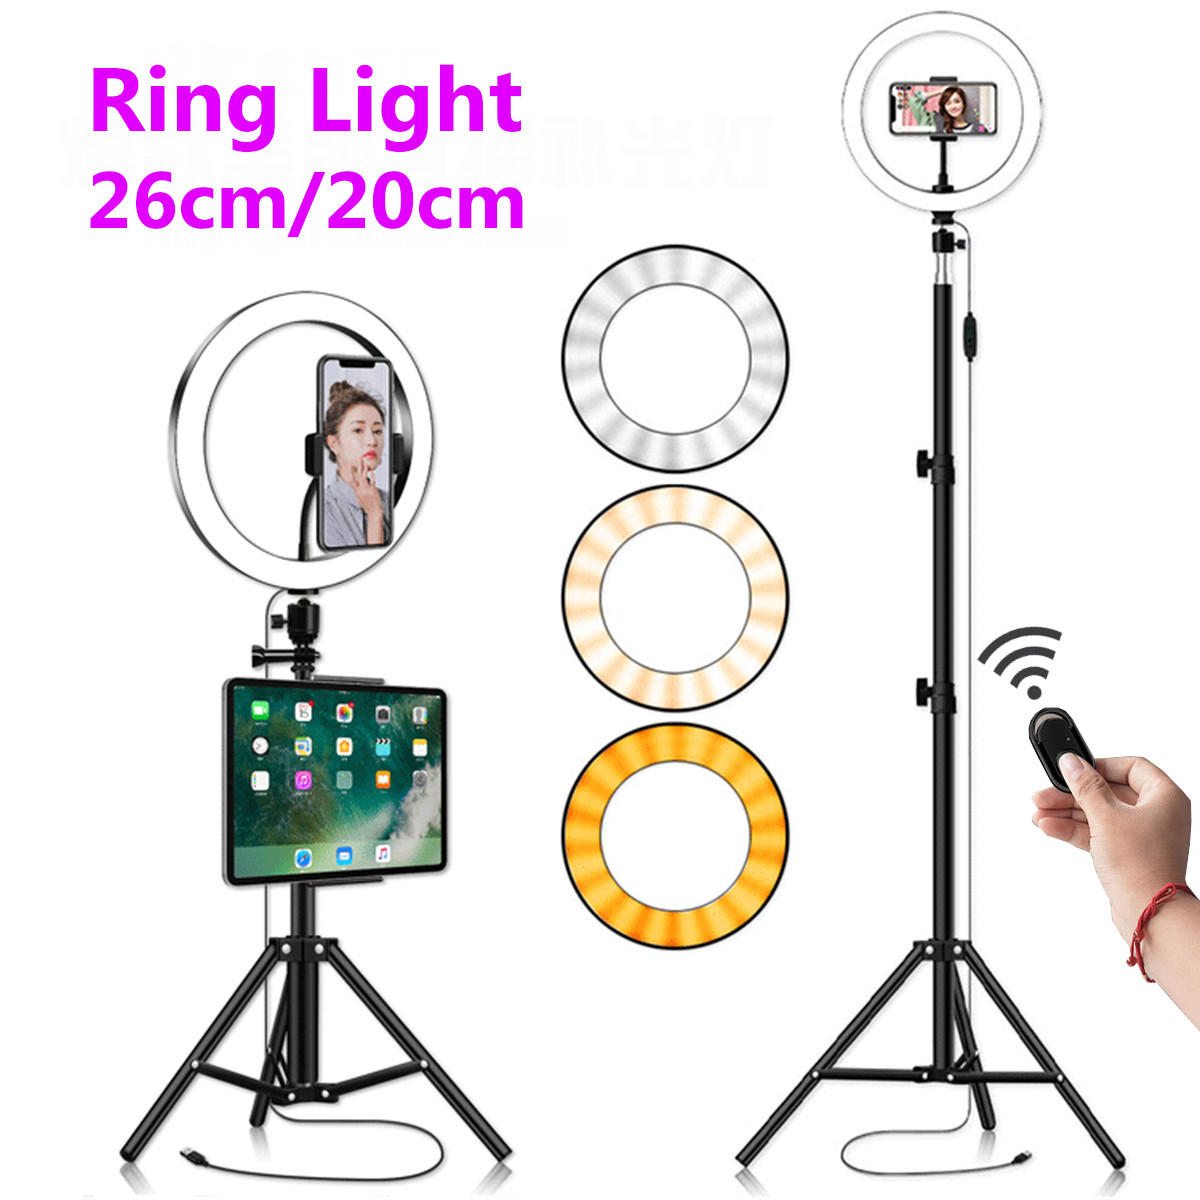 LED-Fill-Ring-Light-Kit-Dimmable-3200K-5500K-with-Phone-Holder-Tripod-Remote-Control-for-Photography-1785757-2